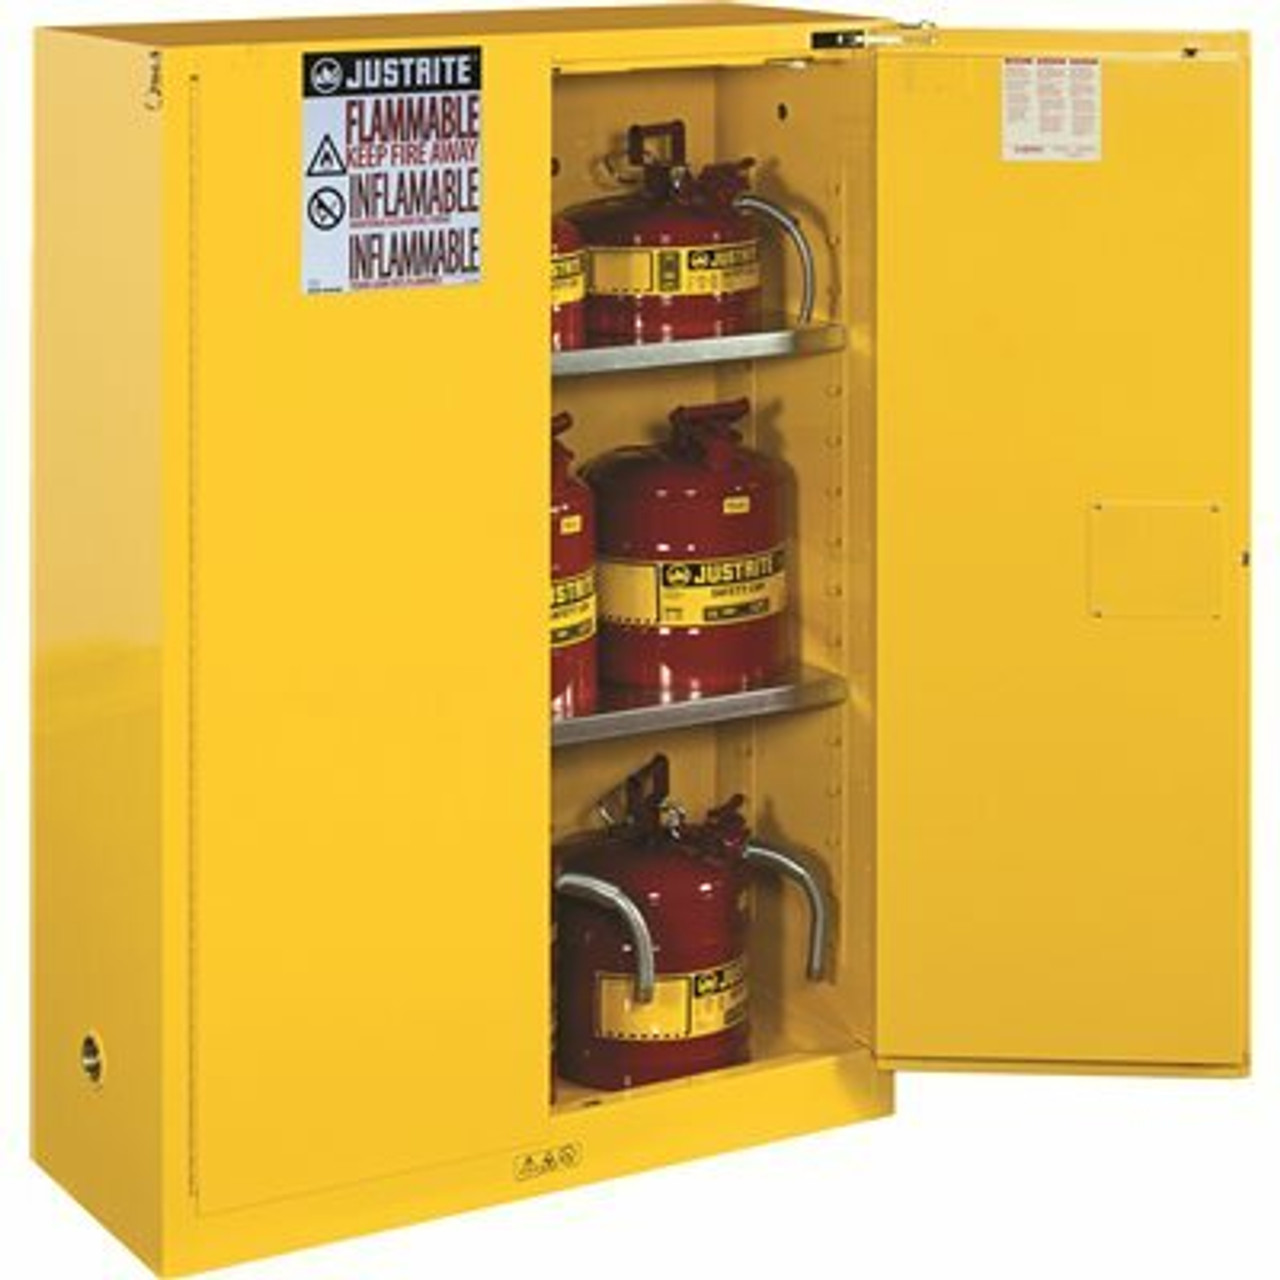 Justrite Safety Storage Cabinet, 60 Gallon, 65 In. X 34 In. X 34 In., Manual Close